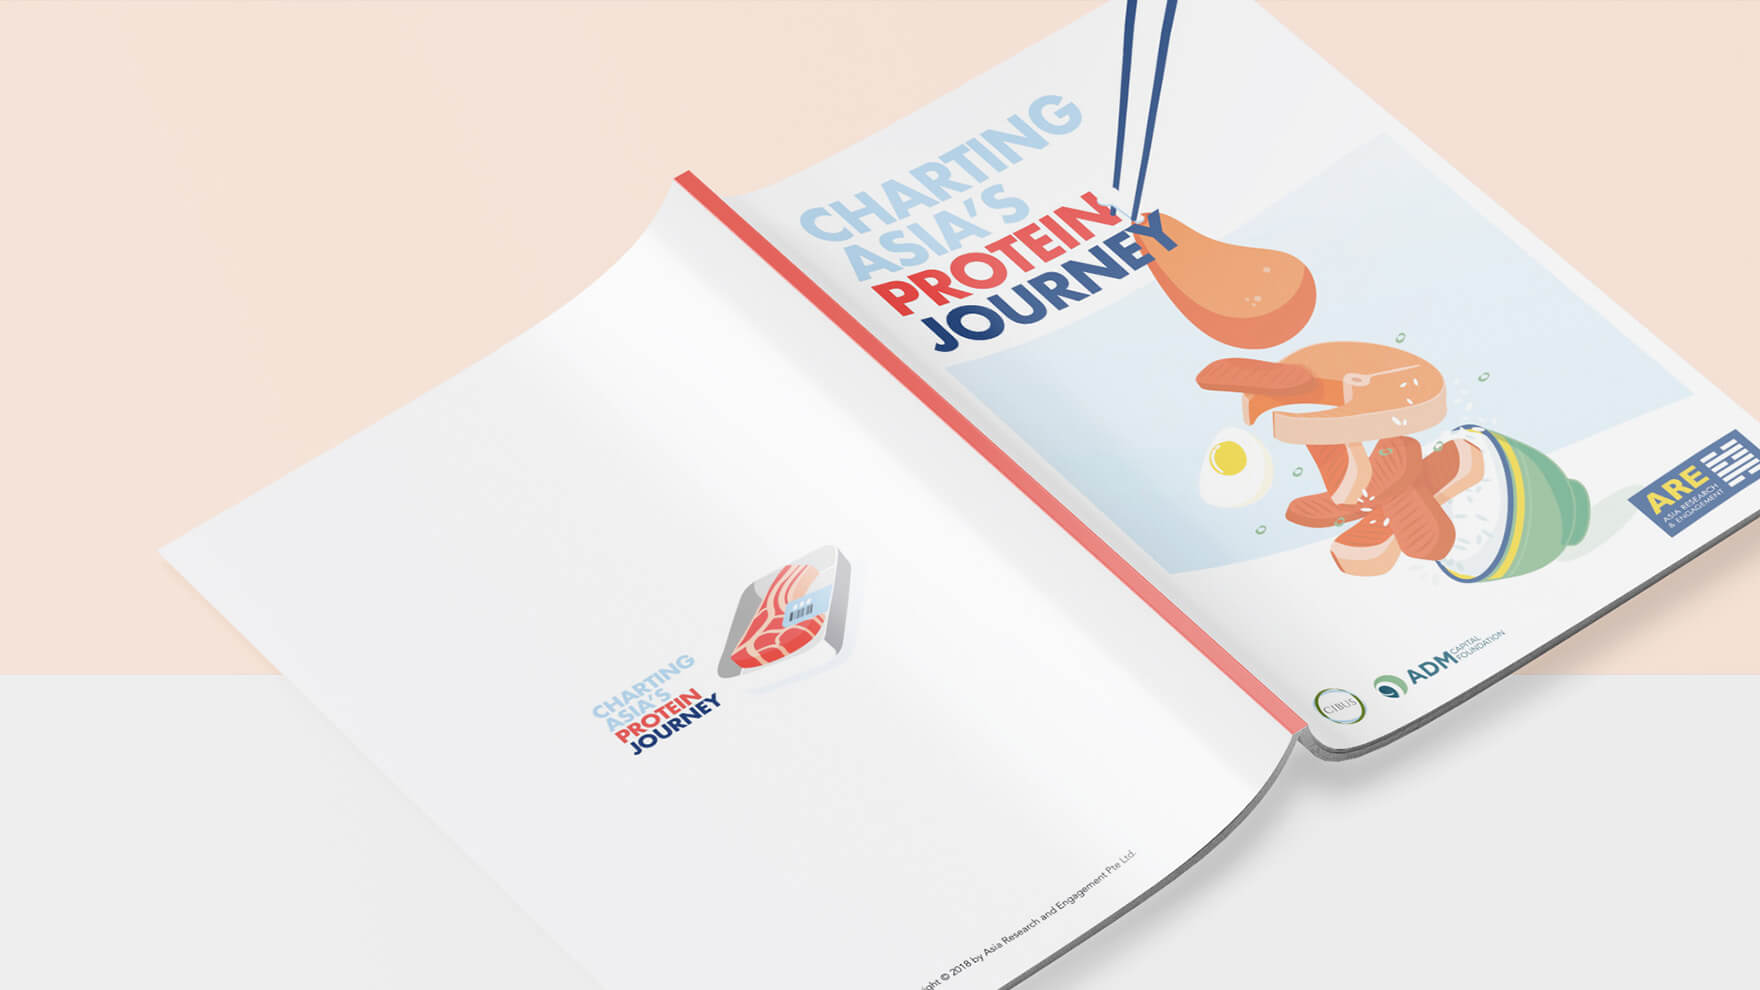 Branding Agency Hong Kong_ADMCF_ChartingAsiasProteinJourney_Research Report Design_CheddarMedia_7_1760